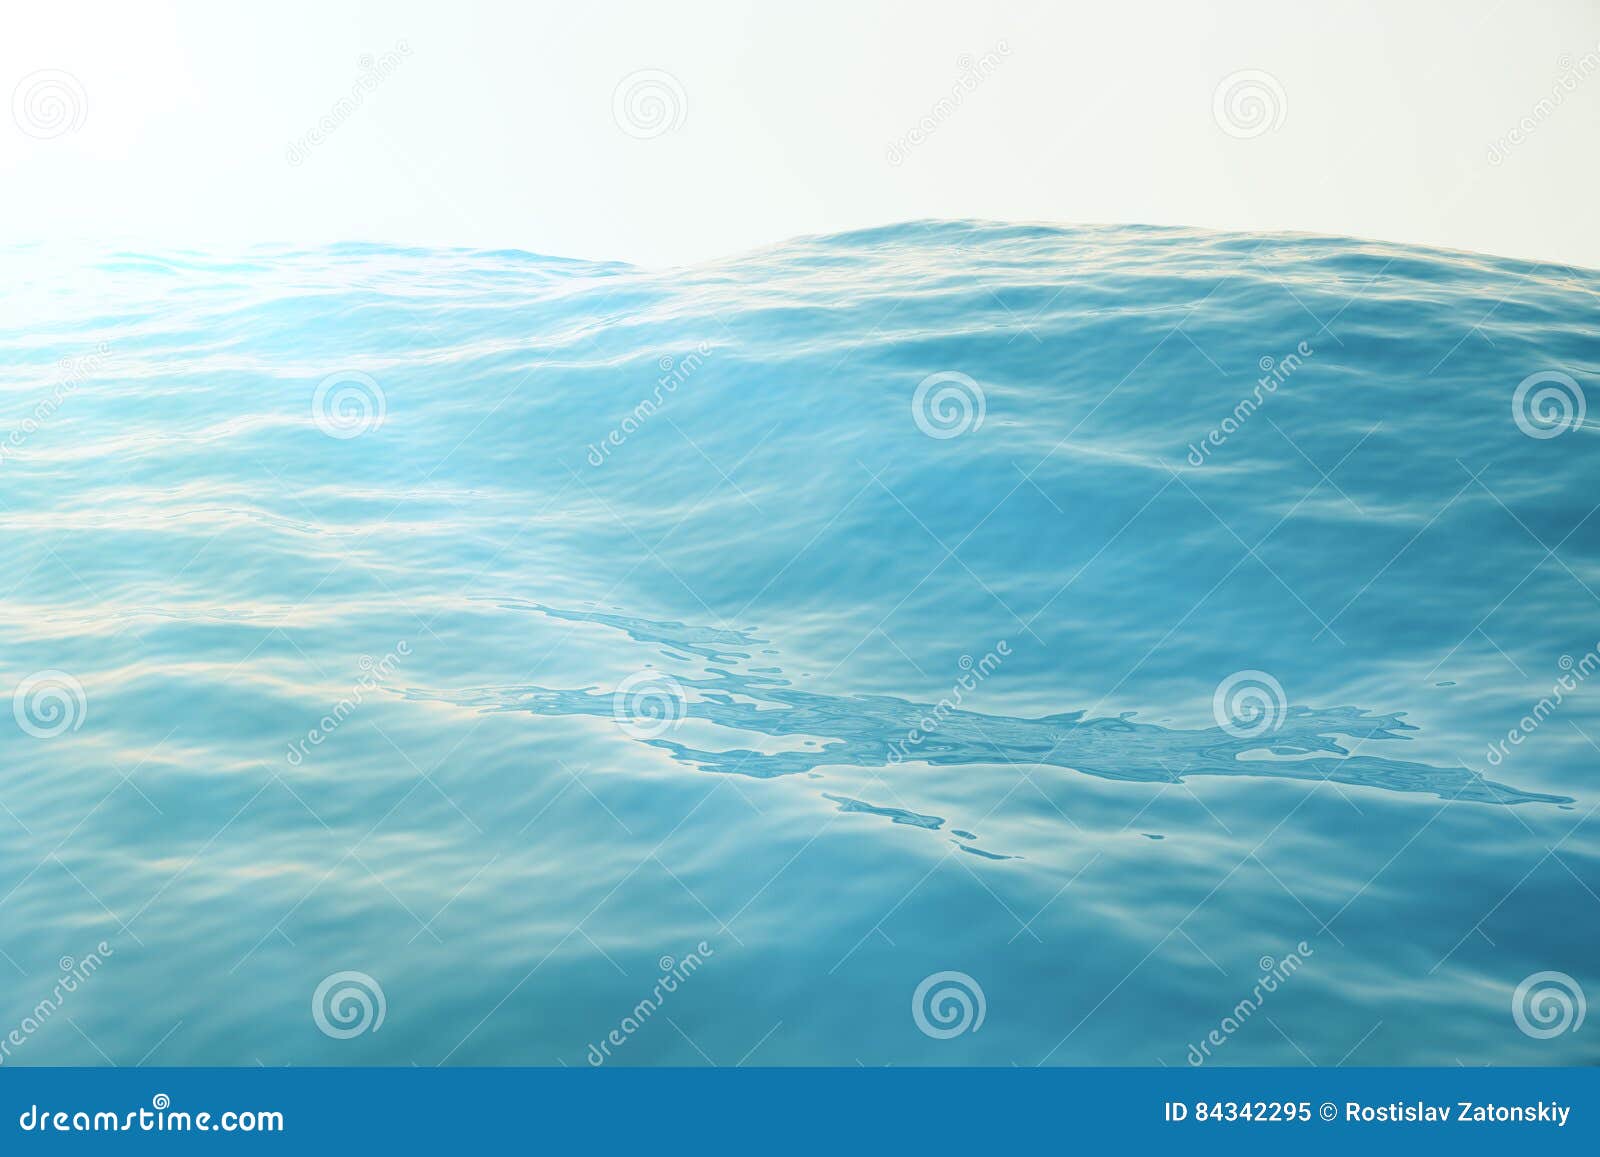 Sea, Ocean Wave and Blue Sky Background with Focus Effects. 3d Rendering  Stock Illustration - Illustration of beach, coast: 84342295